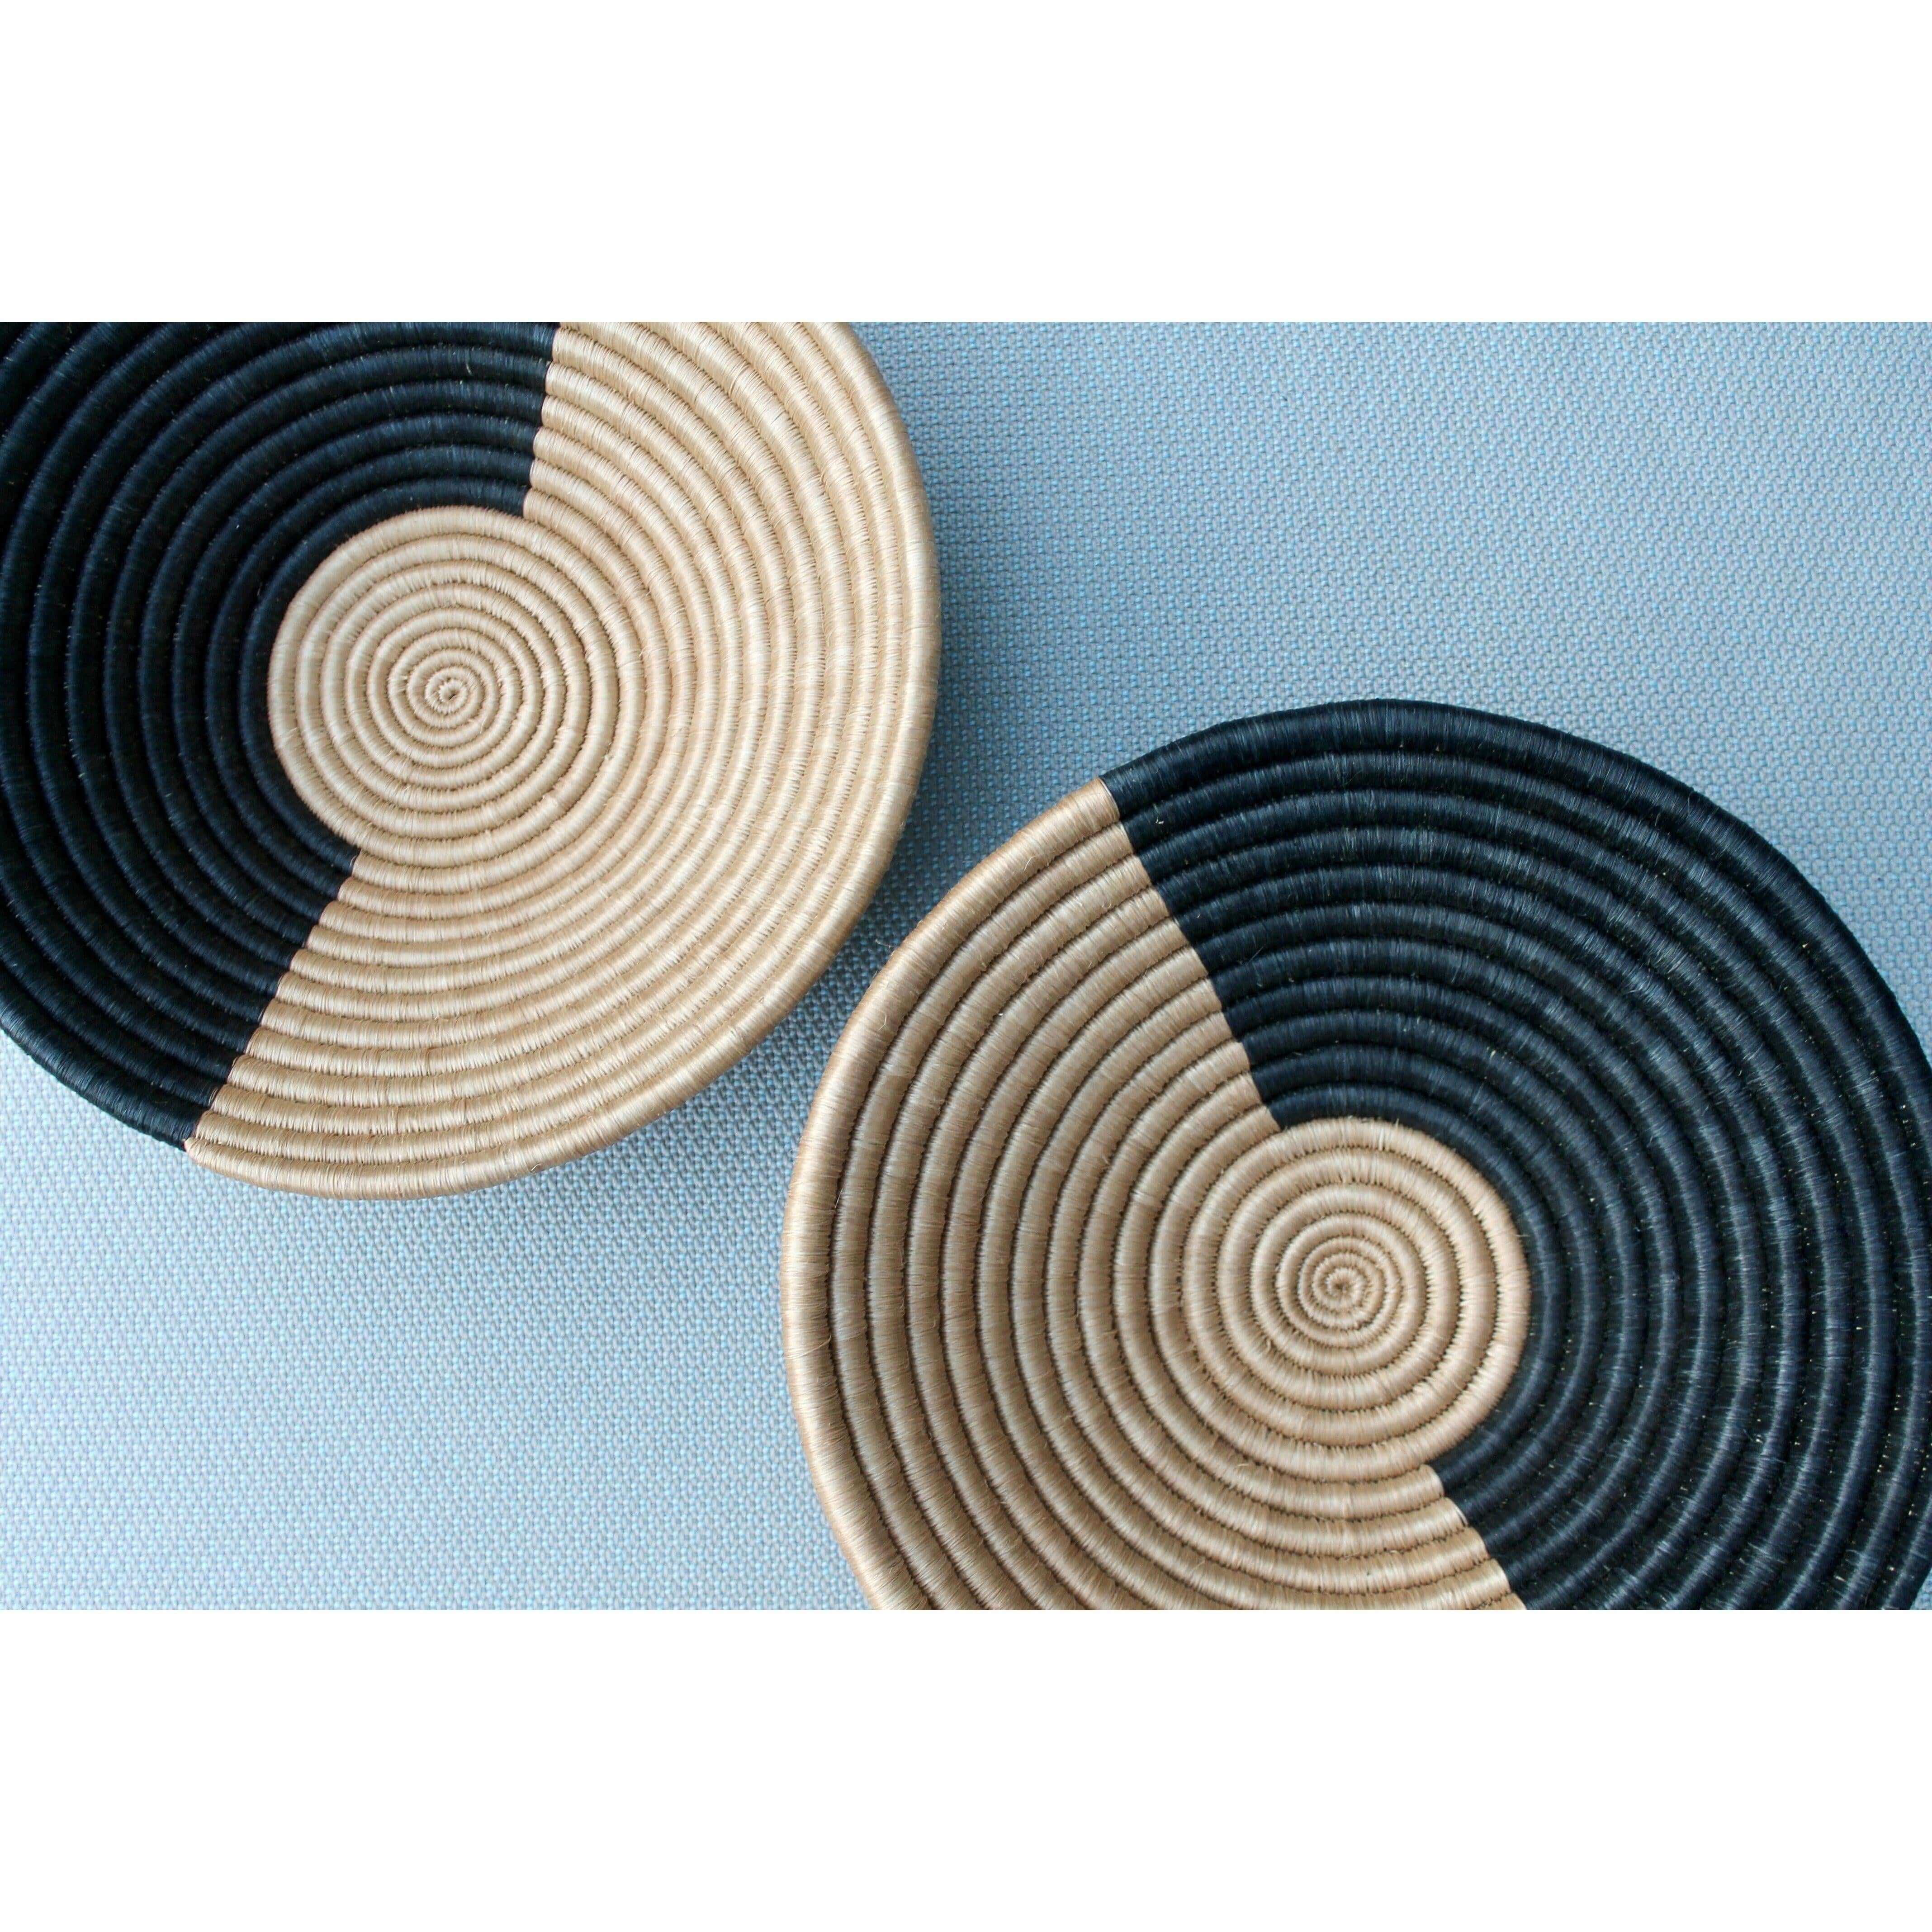 Sustainable woven fruit bowls